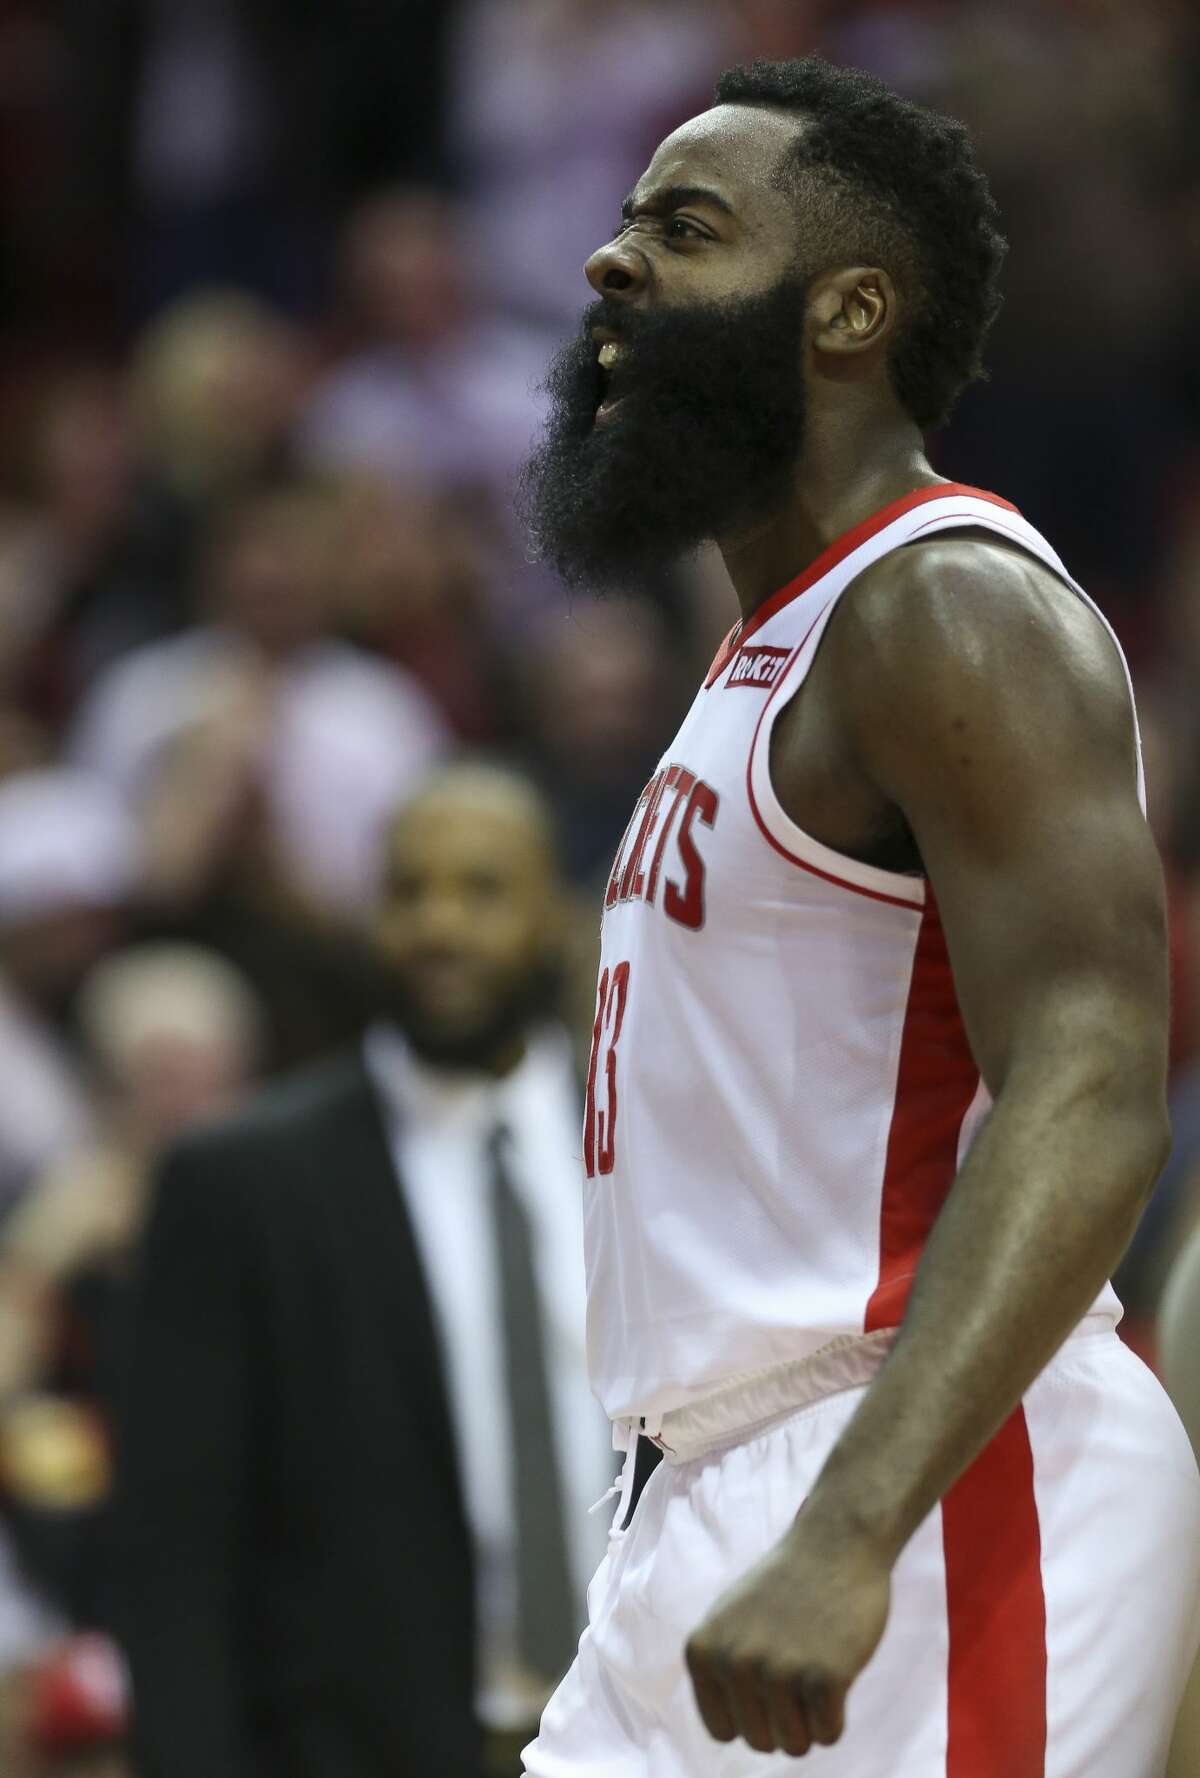 Houston Rockets guard James Harden (13) celebrates after scoring a three-pointer against the LA Clippers during the second half of an NBA game at the Toyota Center Wednesday, Nov. 13, 2019, in Houston.